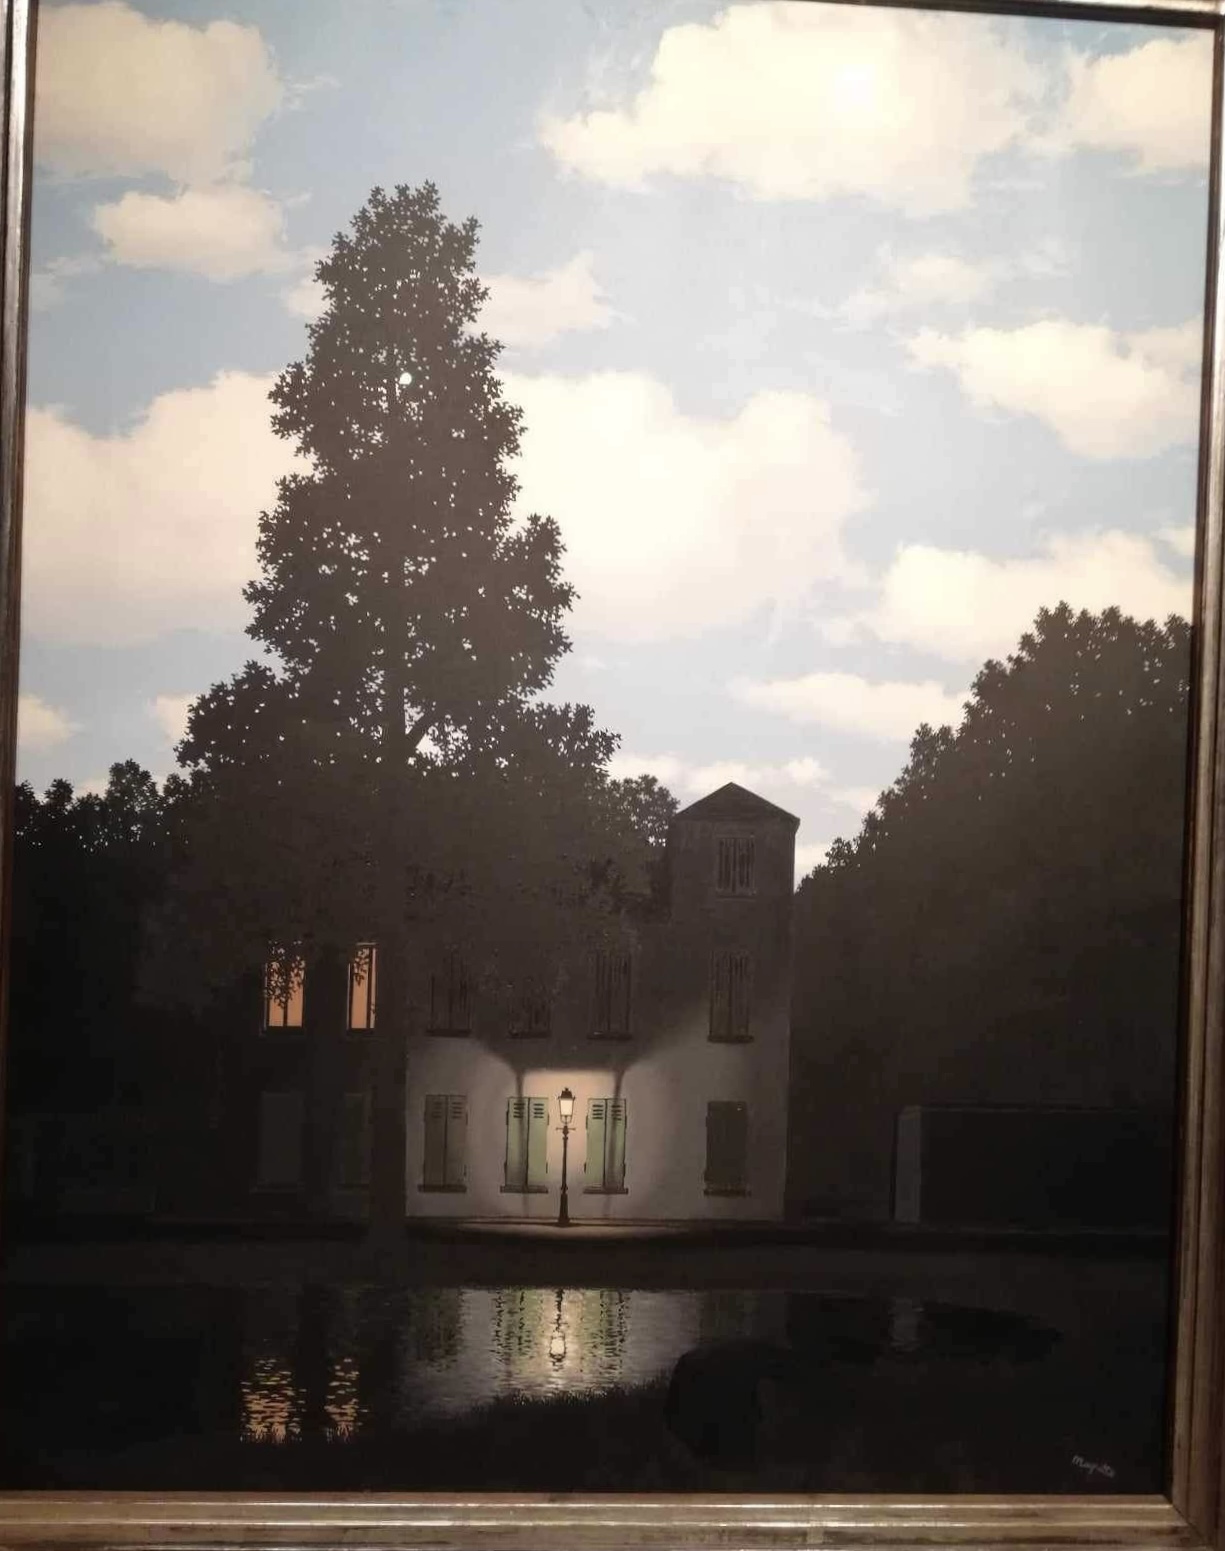 A Visit to Magritte